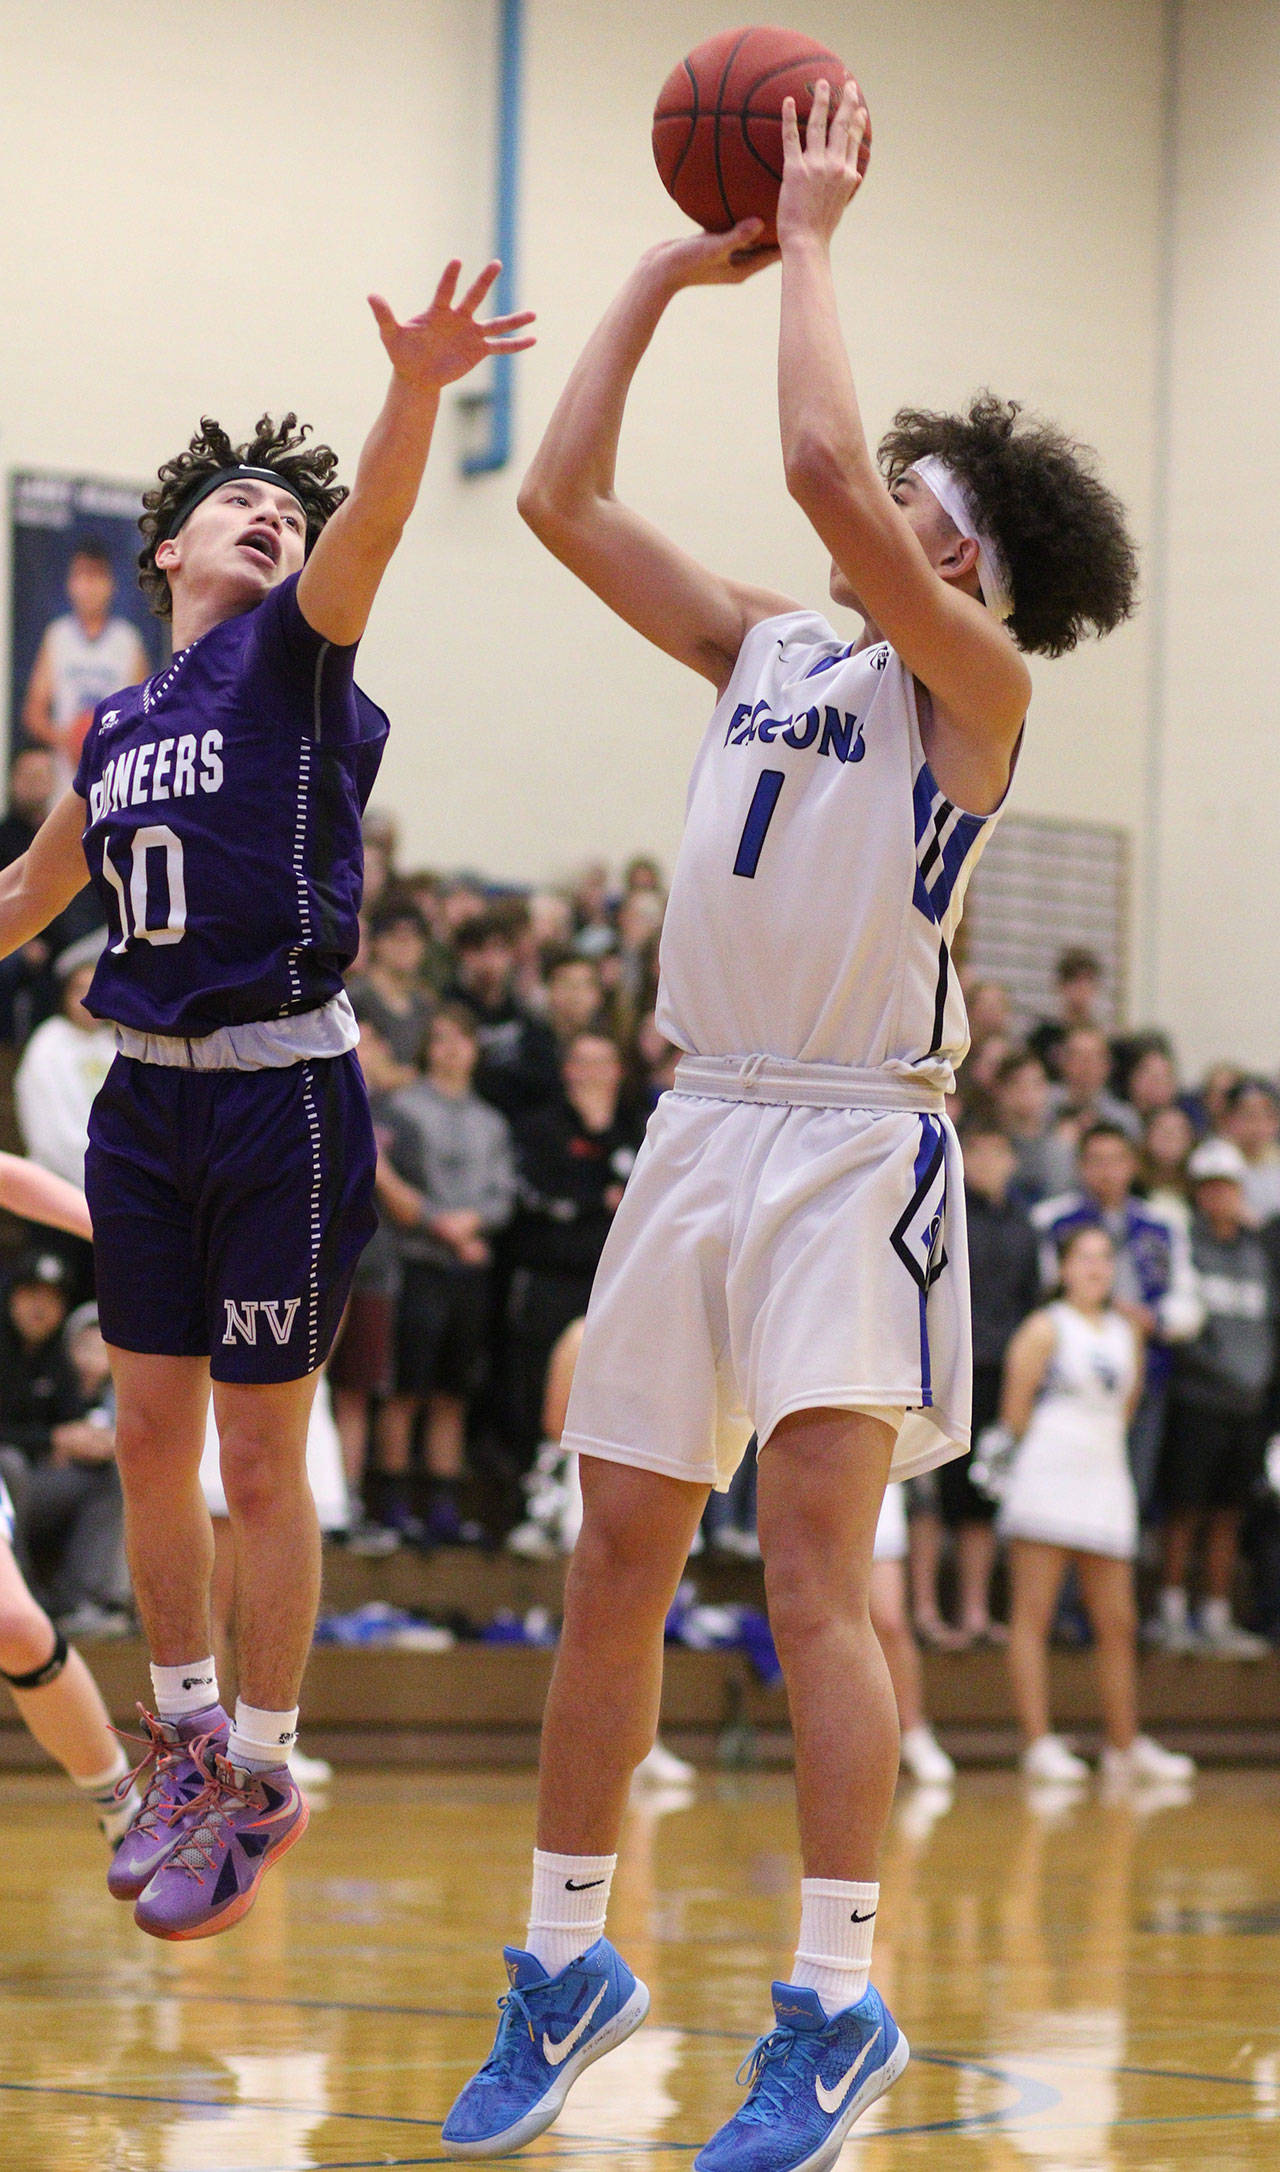 Jacob Ng puts up a jumper. (Photo by Steve Smith)